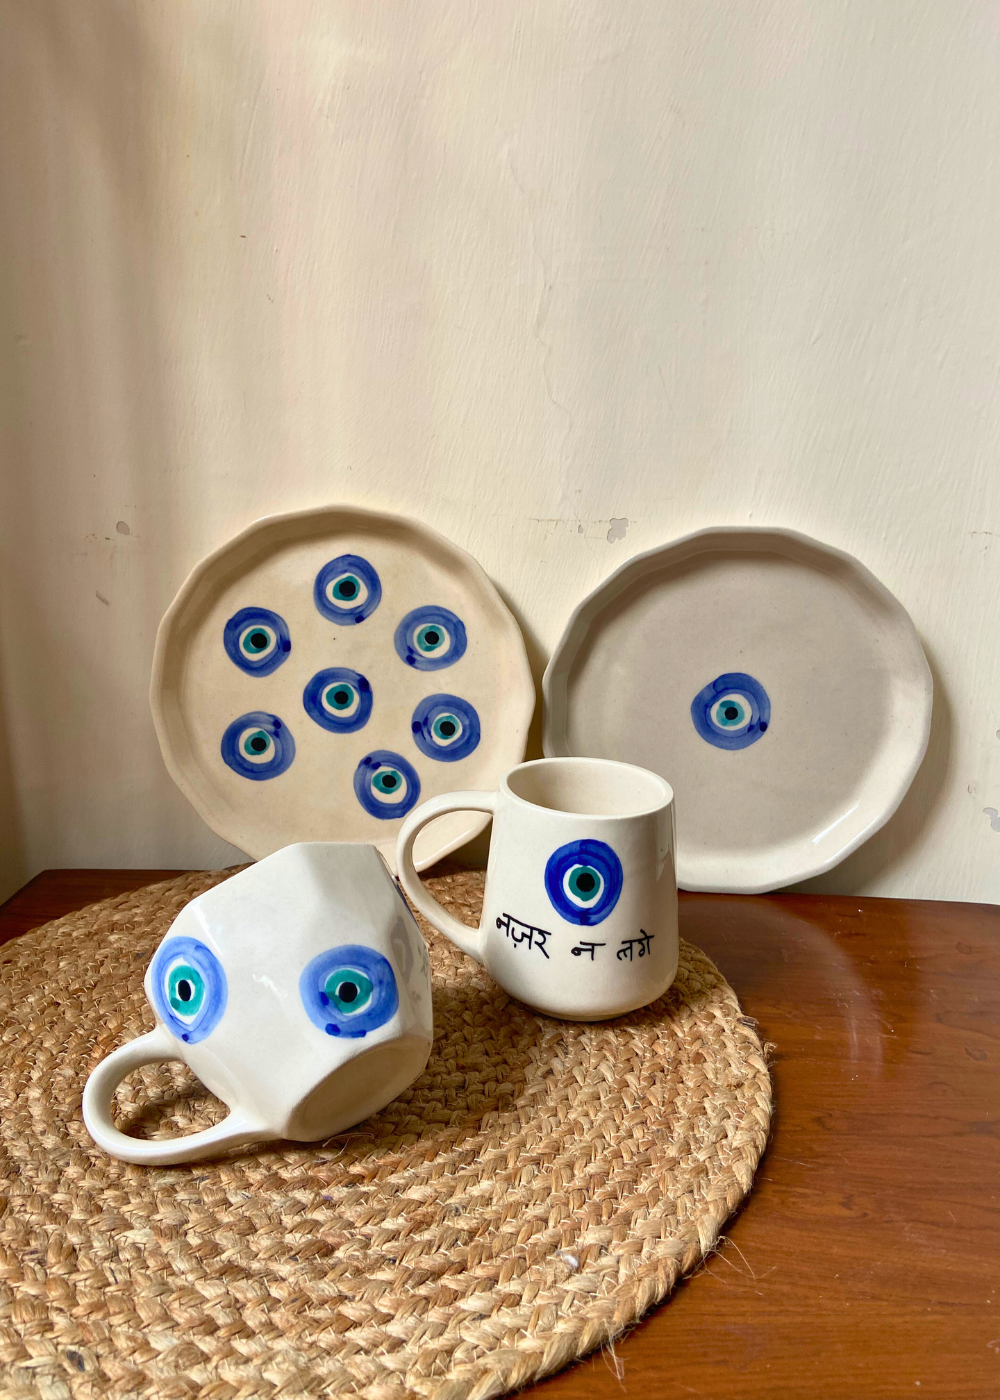 The evil eye combo made by ceramic 